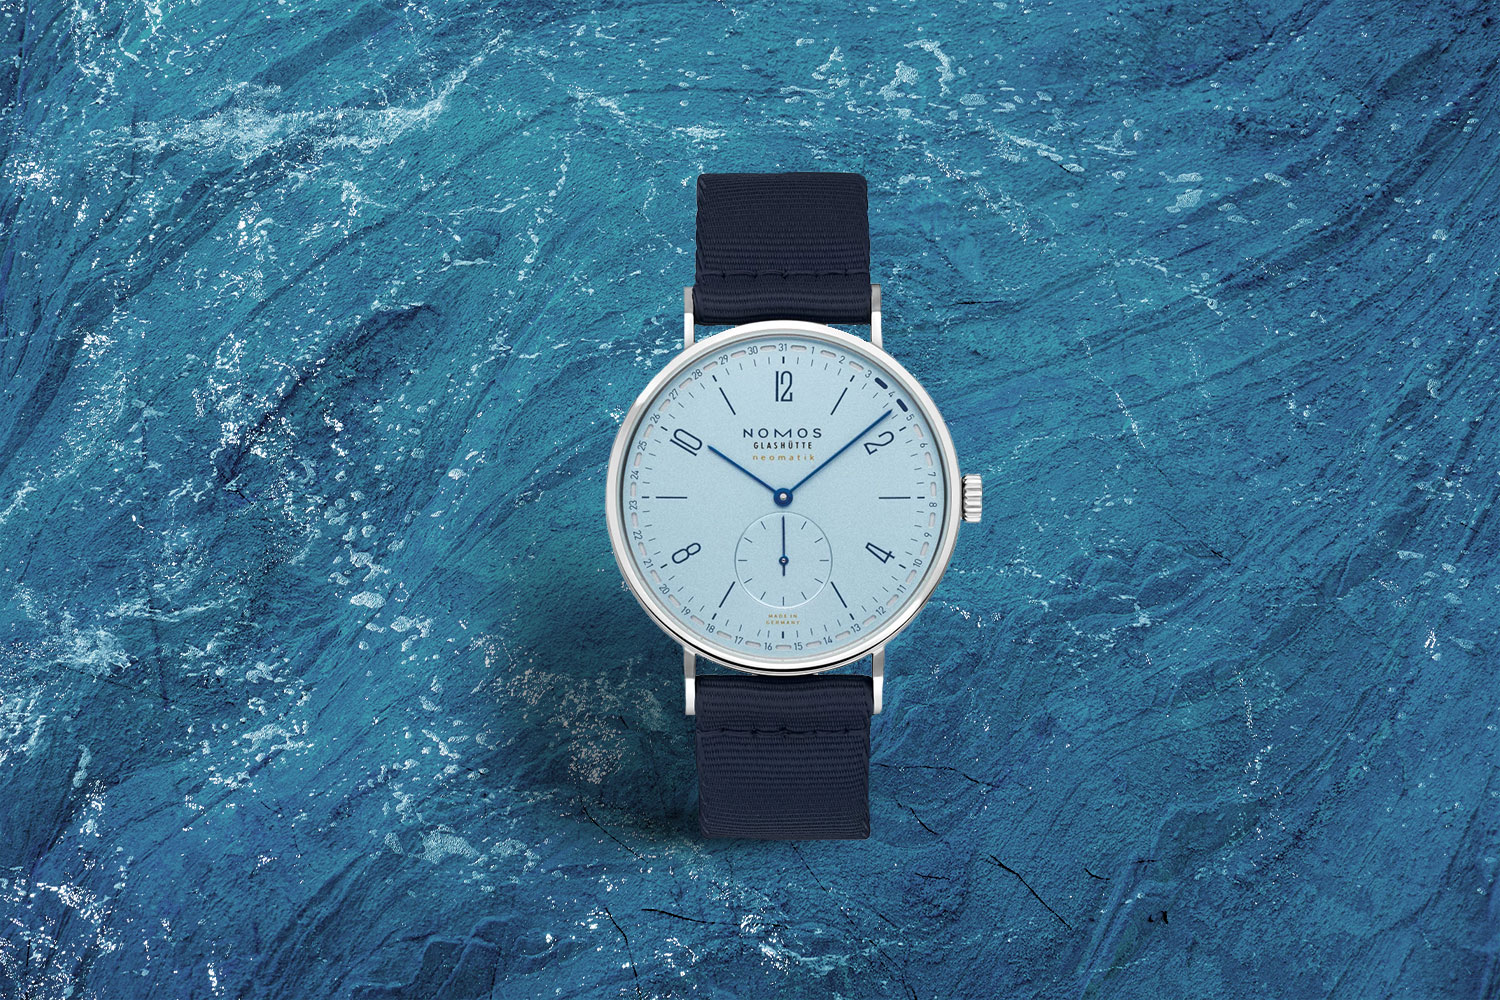 Blue-colored watch